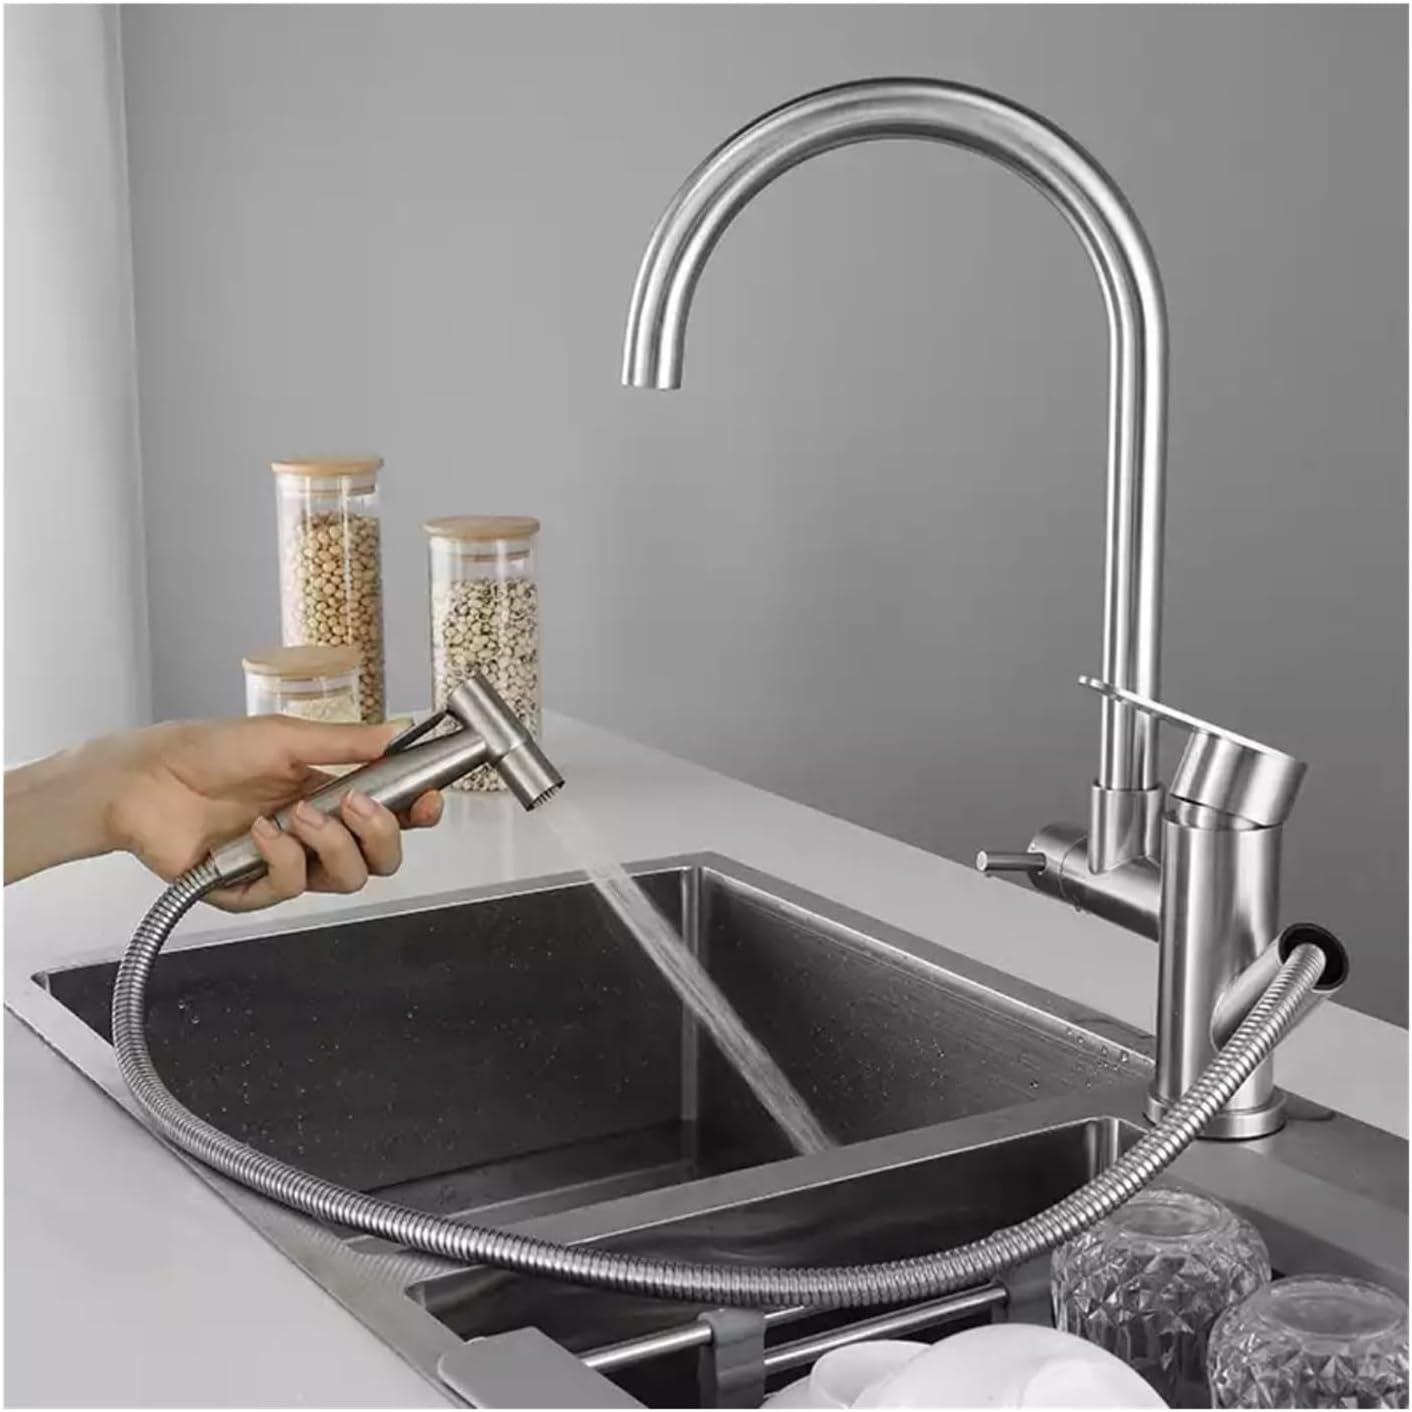 Buy Maxten Stainless Steel Satin Nickel Multifunctional Kitchen Sink Faucet Tap - SKP30-541 | Shop at Supply Master Accra, Ghana Kitchen Tap Buy Tools hardware Building materials